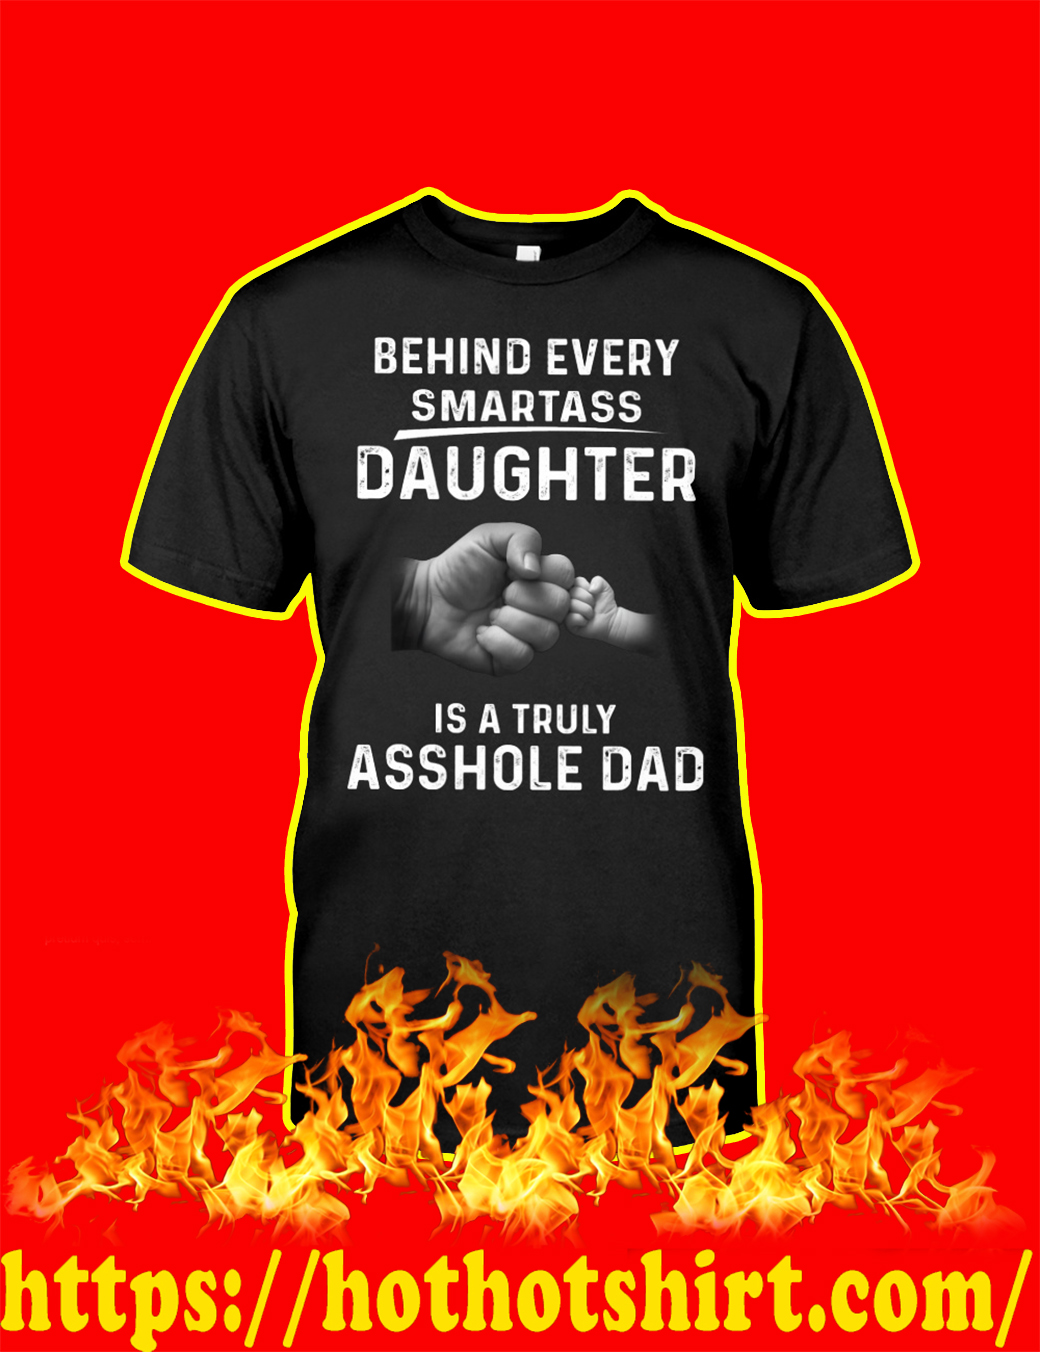 Behind Every Smartass Daughter Is A Truly Asshole Dad shirt, v-neck, sweatshirt